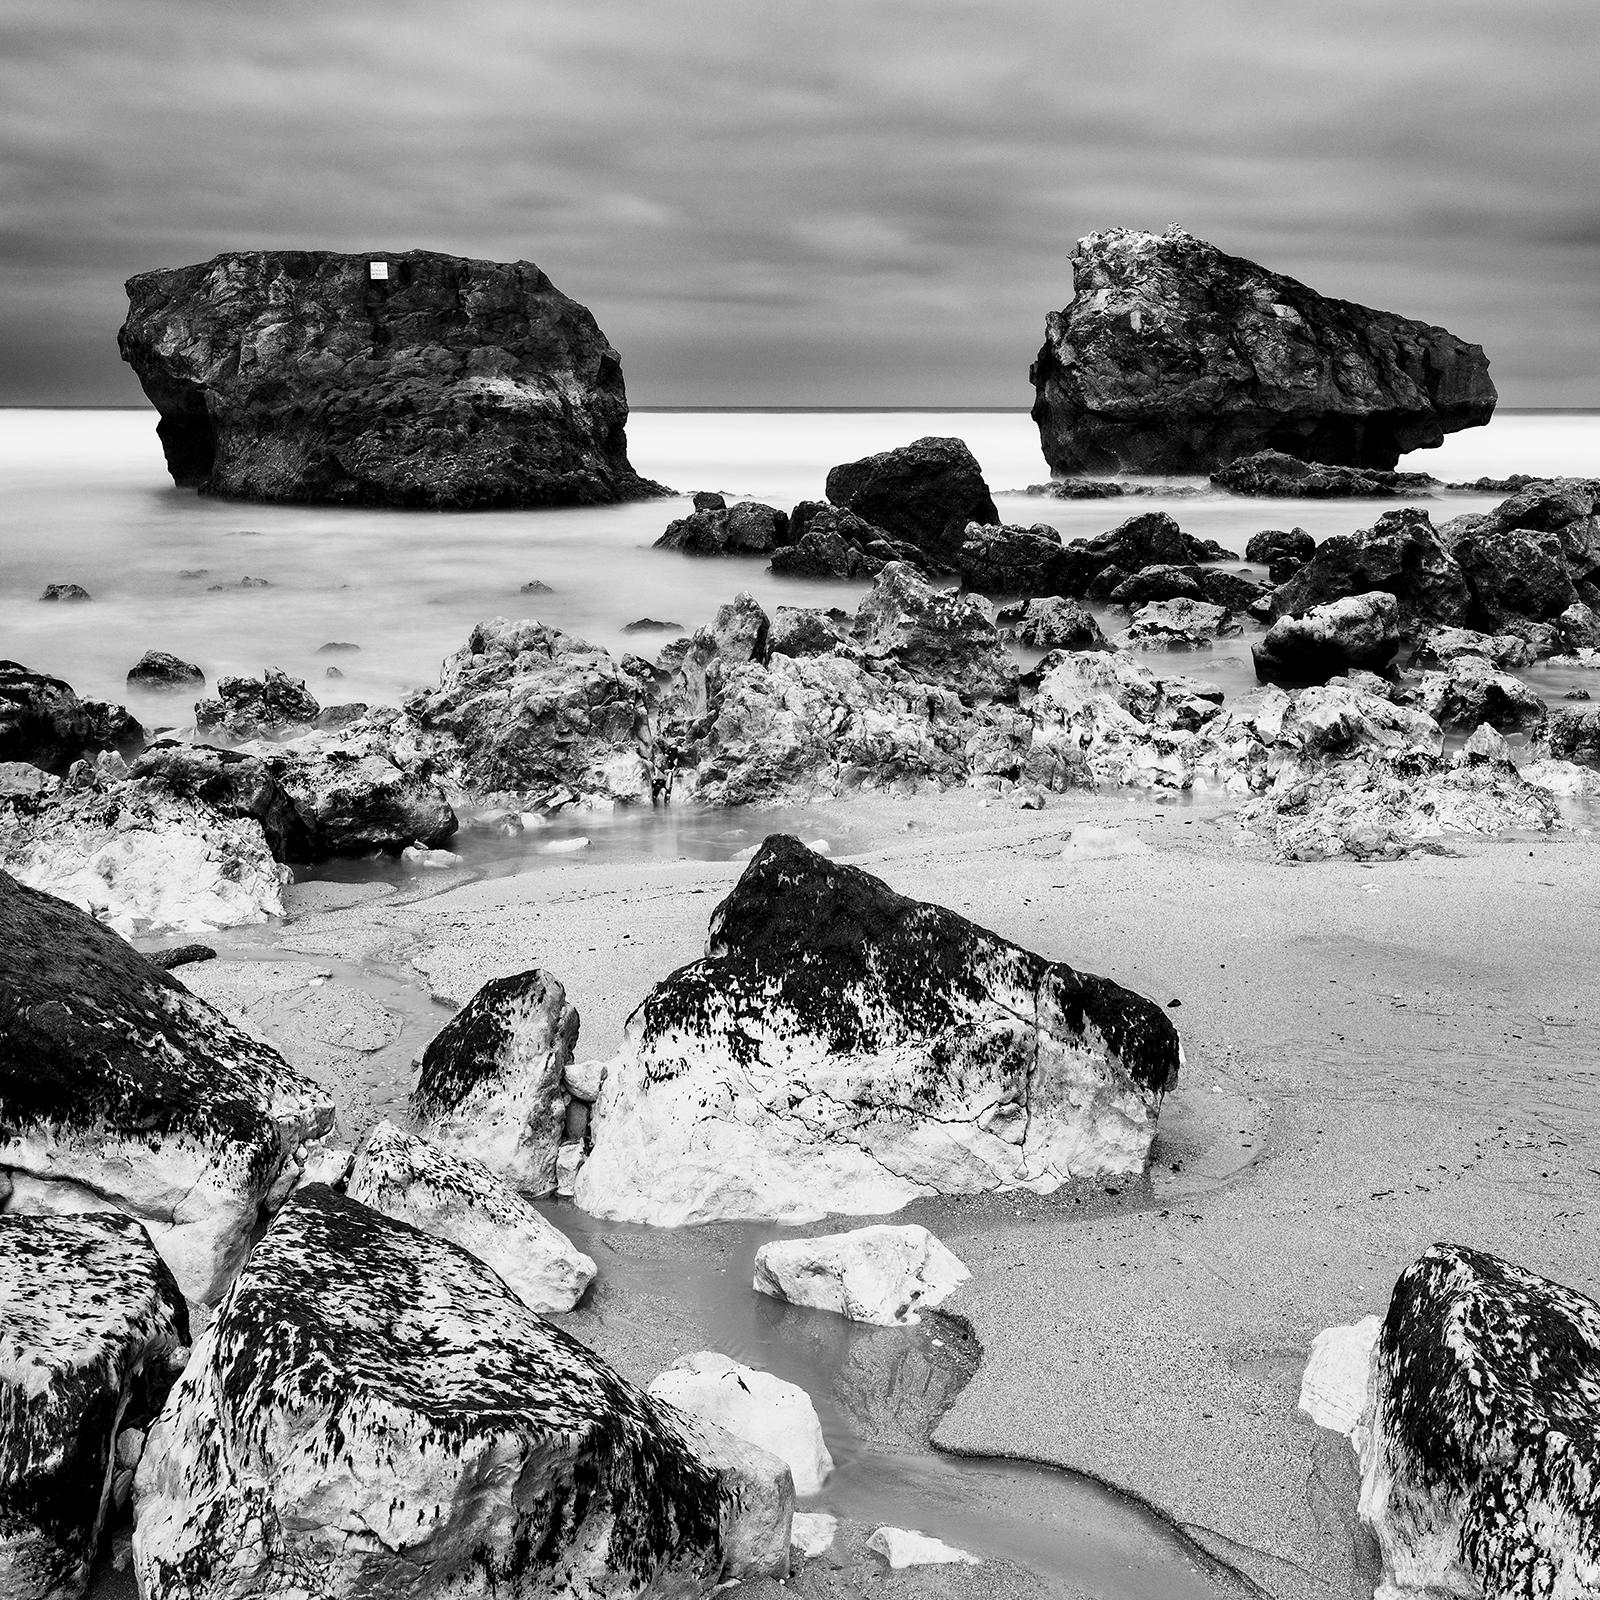 Point de vue, rocky beach, stormy, France, black and white landscape photography For Sale 4